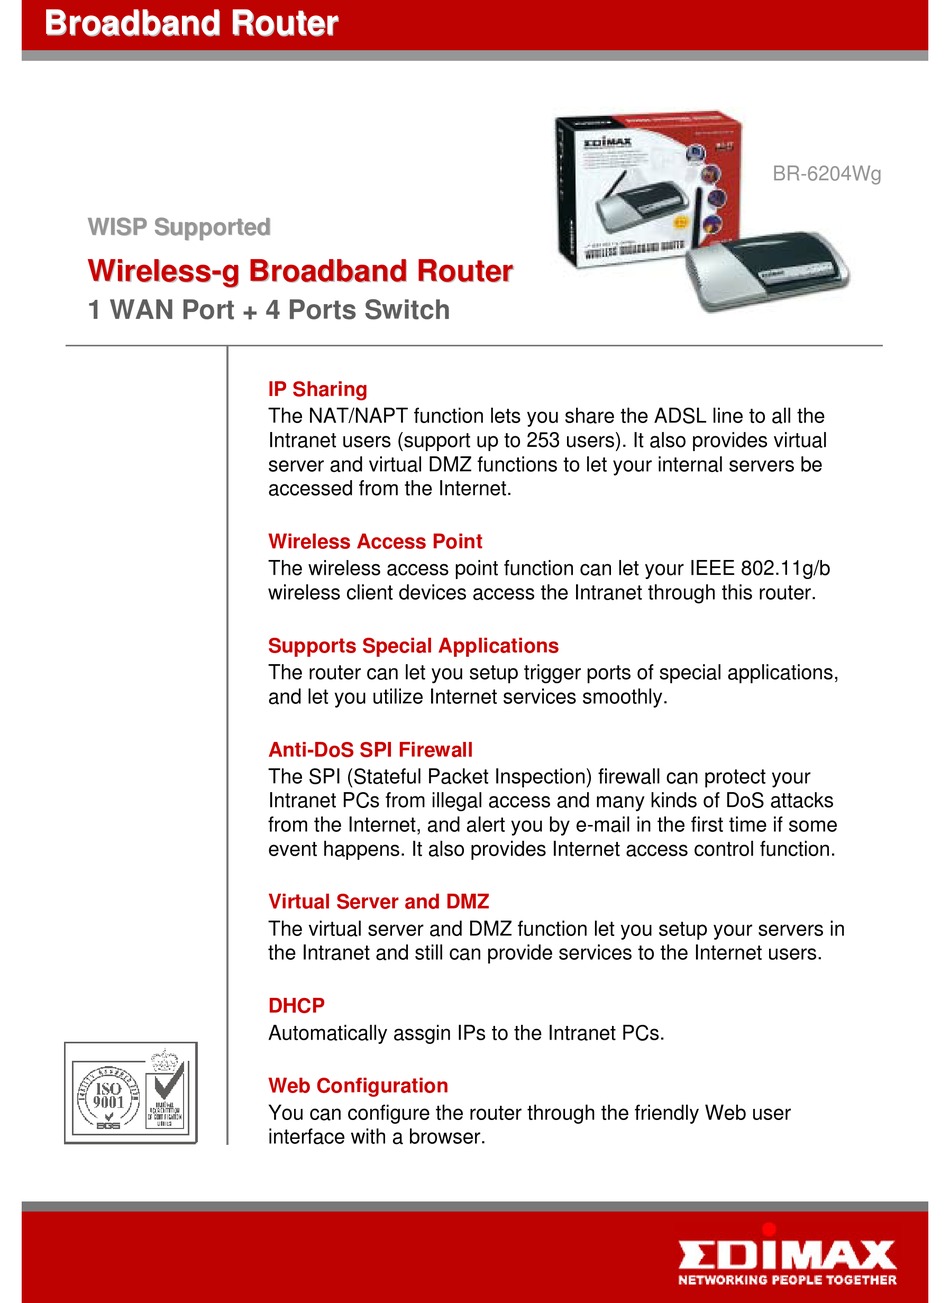 Depletion shave launch EDIMAX BR-6204WG WIRELESS ROUTER SPECIFICATIONS | ManualsLib